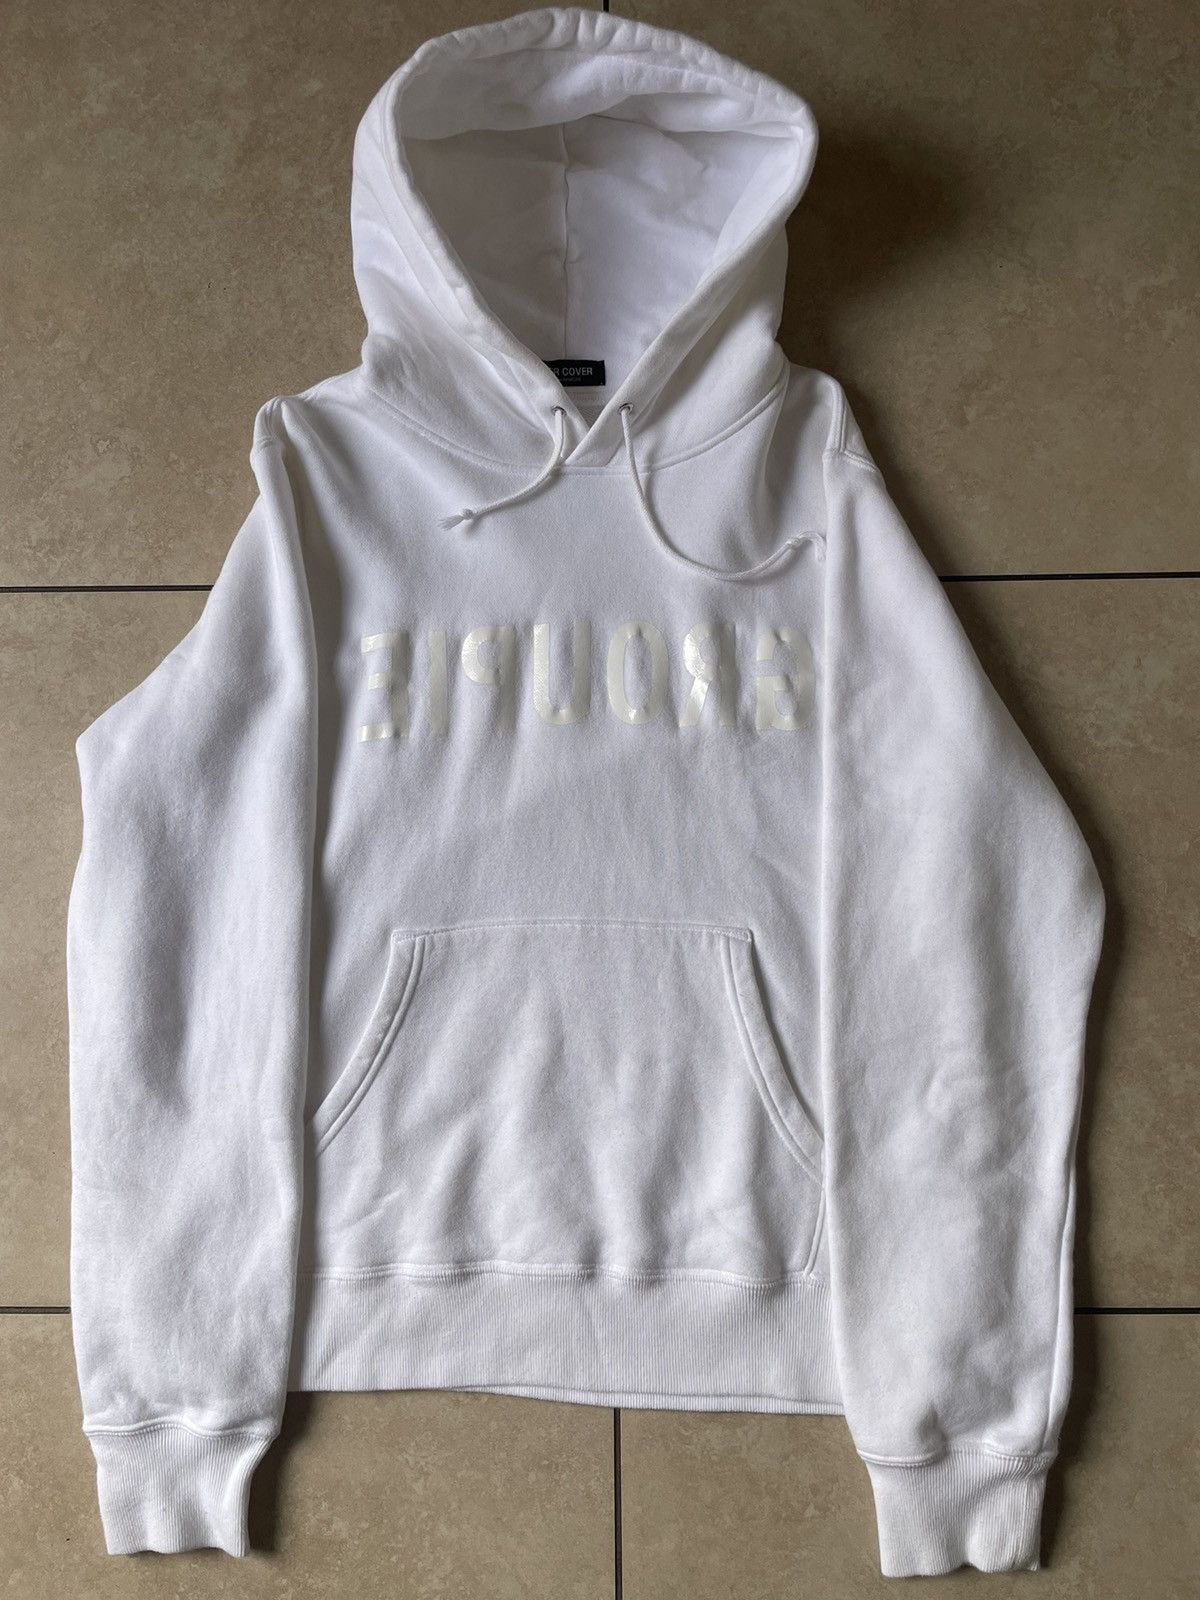 Undercover undercover groupie hoodie 99ss white | Grailed